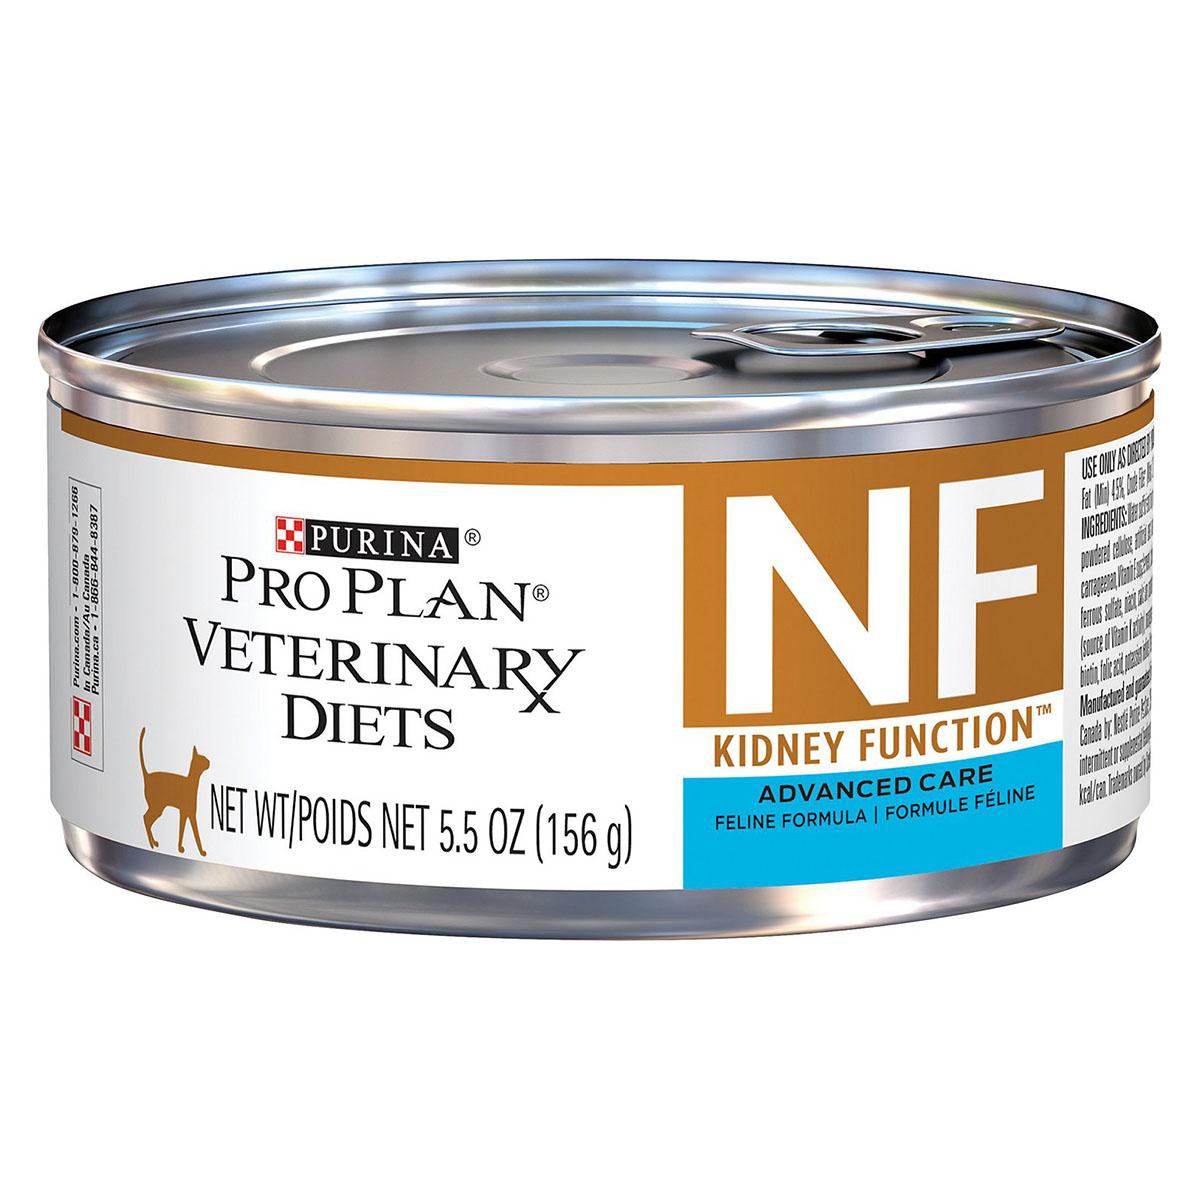 Purina Pro Plan Veterinary Diets NF Kidney Function Formula Canned Cat Food - Advanced Care